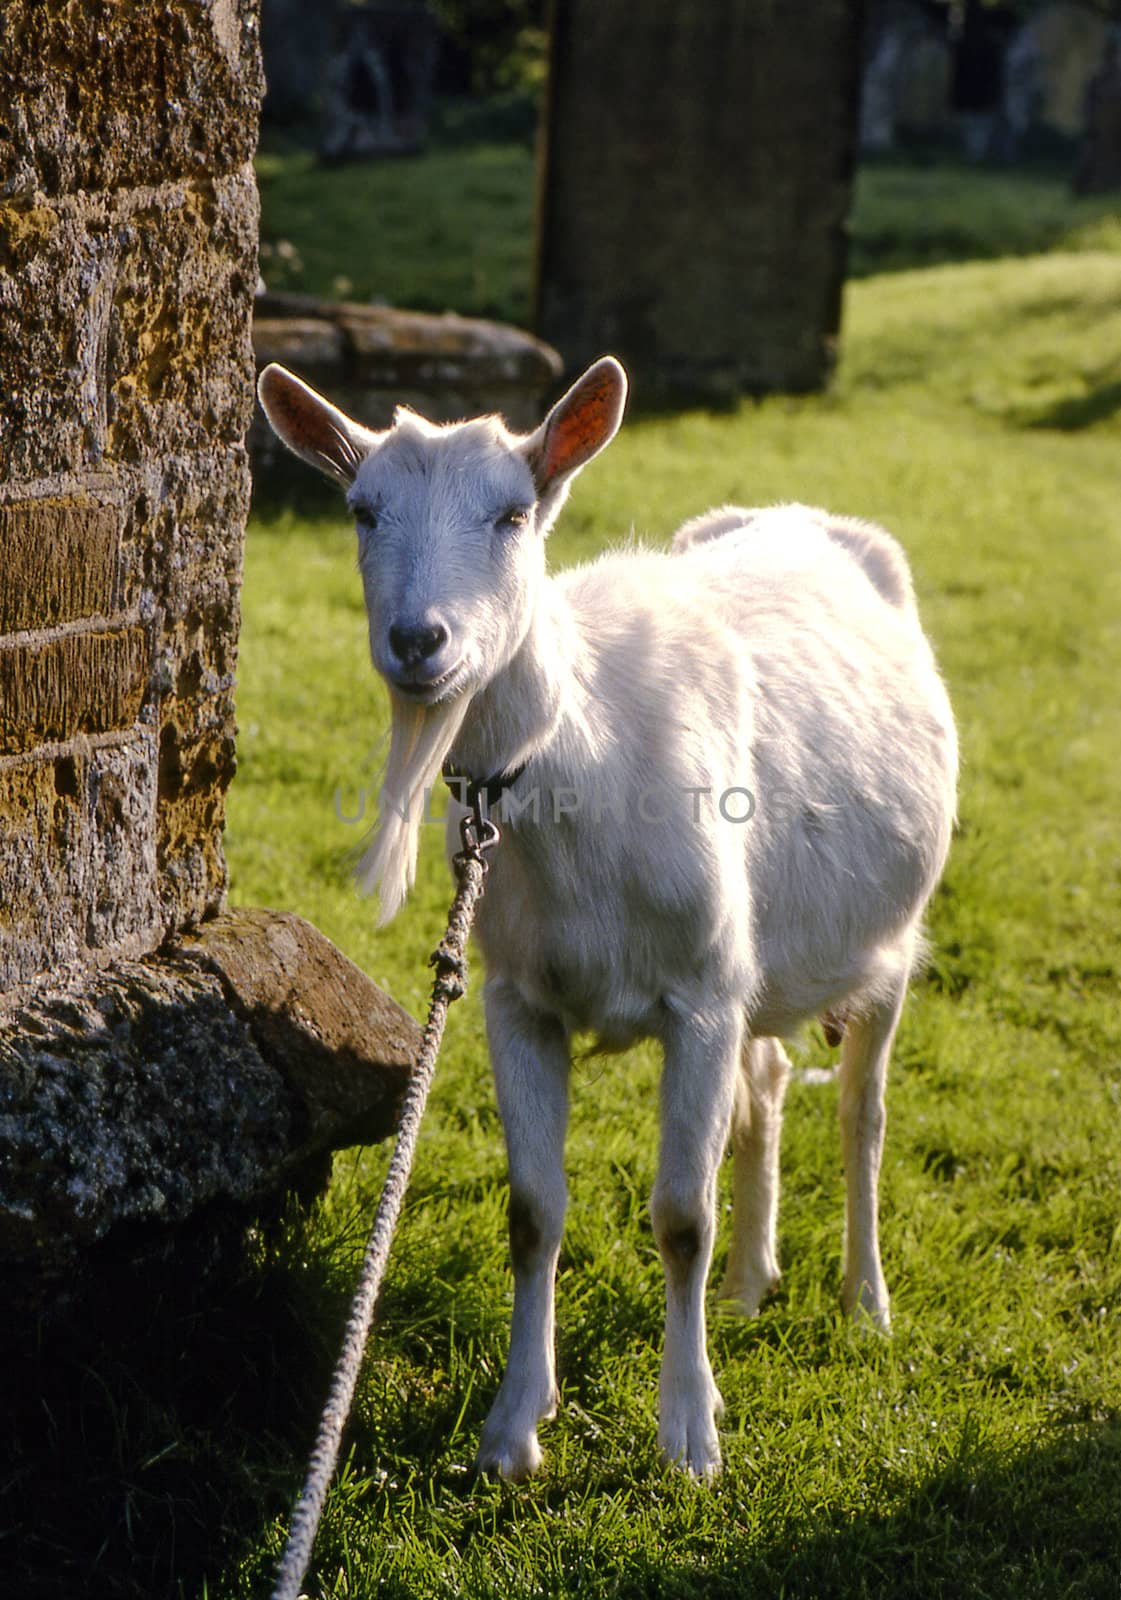 A goat tied up in a churchyard keeping the grass short.